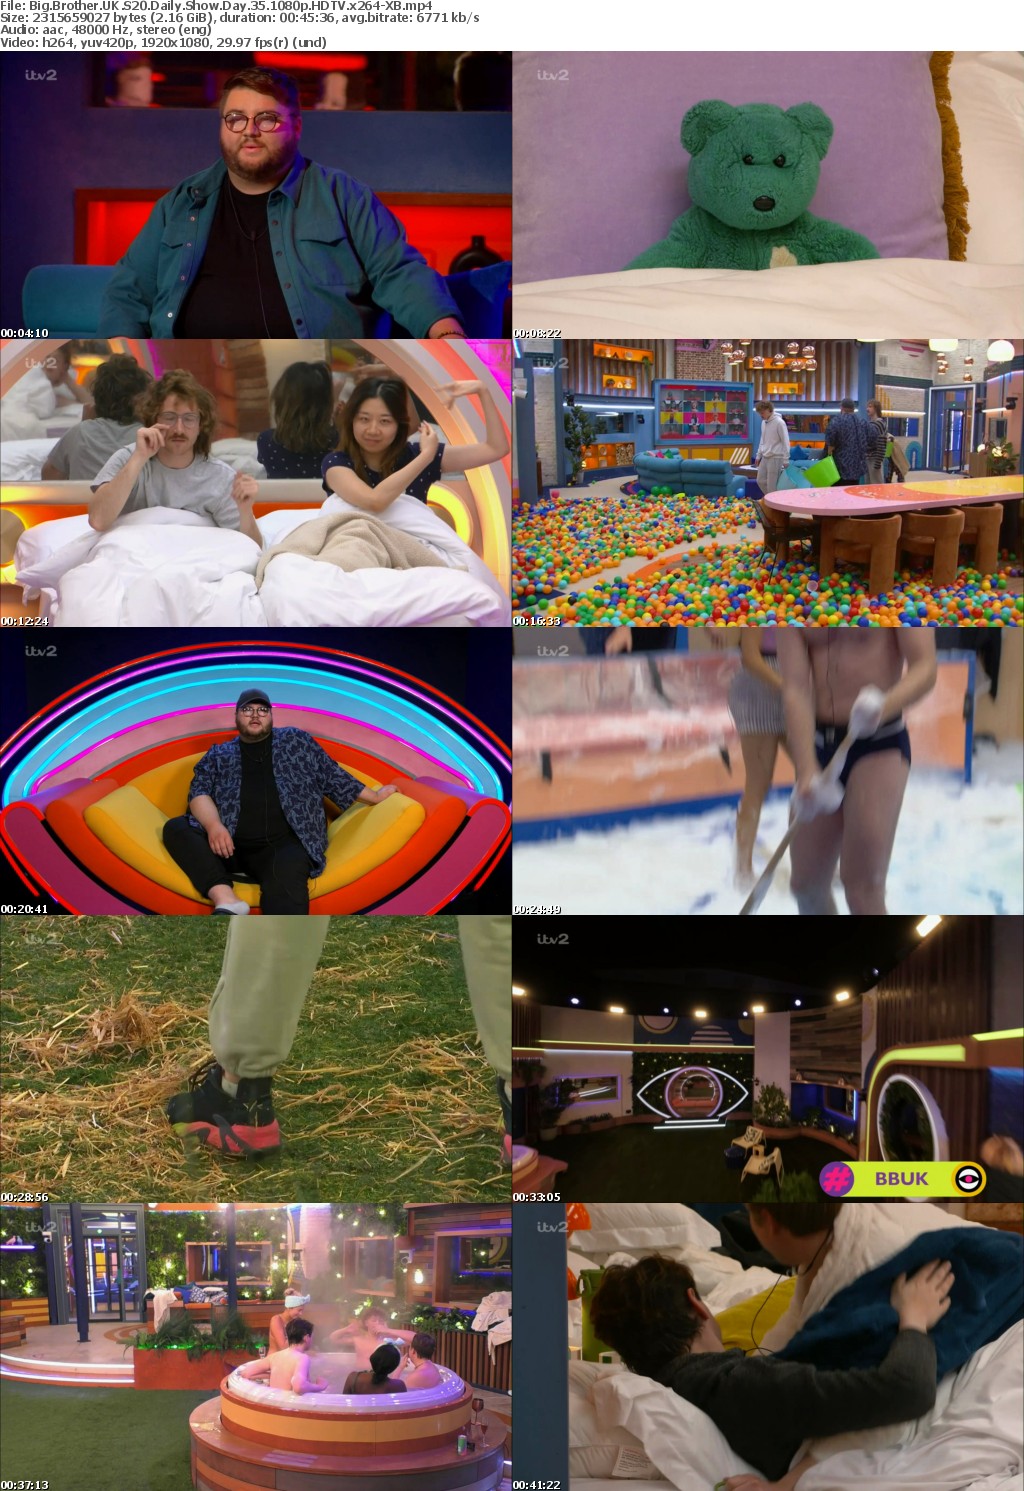 Big Brother UK S20 Eviction Day 35 1080p HDTV x264-XB